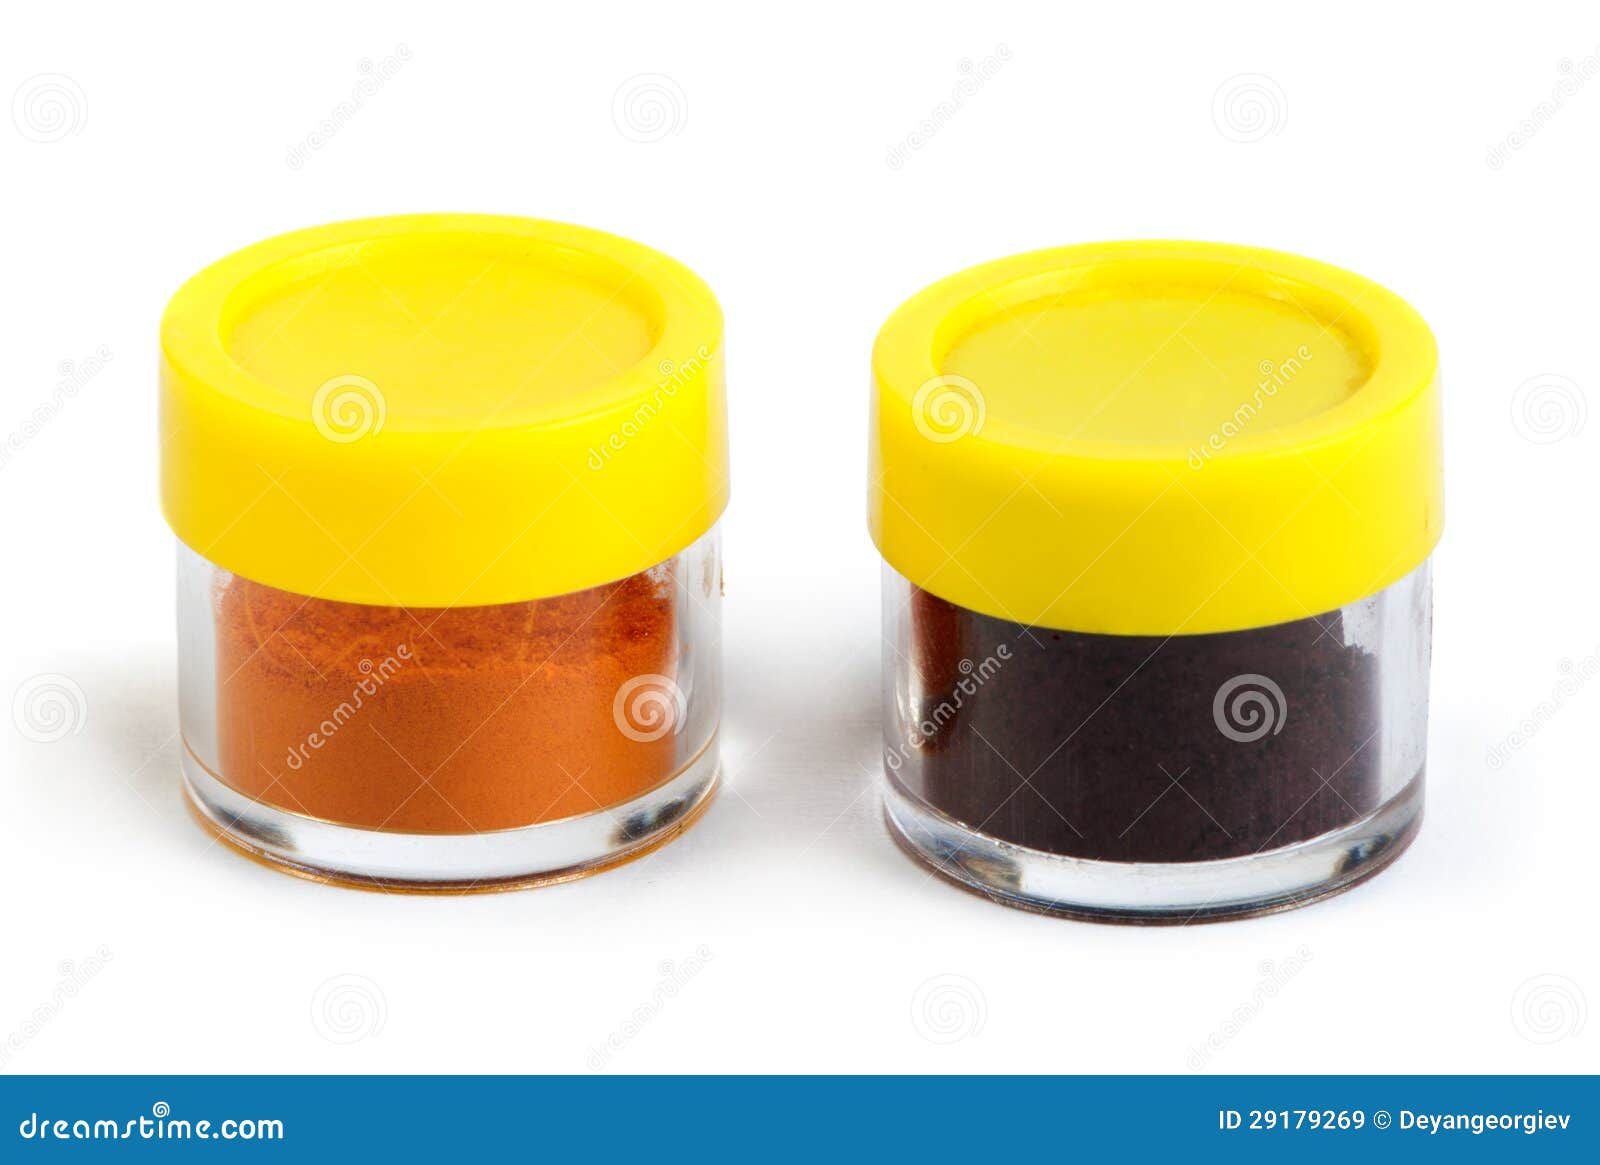 Artificial Food Coloring Pigment or Substances in Pack Stock Image